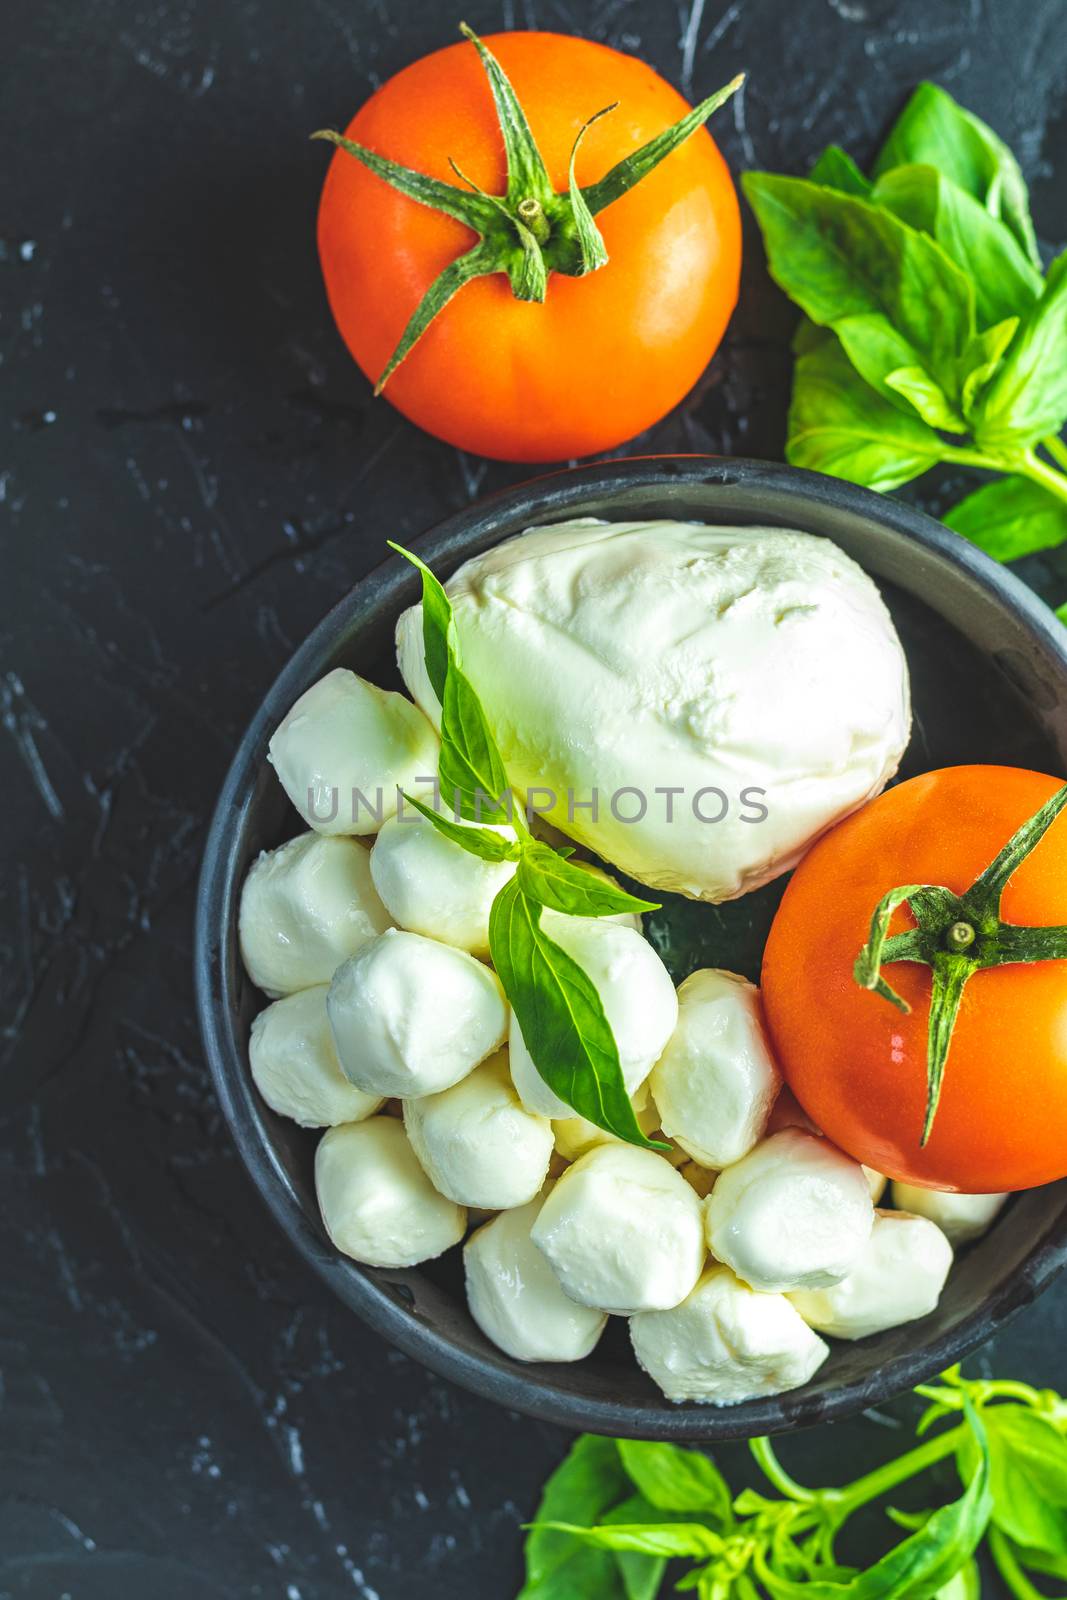 Mozzarella balls, buffalo in black ceramic plate, tomatoes and basil over dark background. With space. Rustic style. Ingredients for italian caprese salad